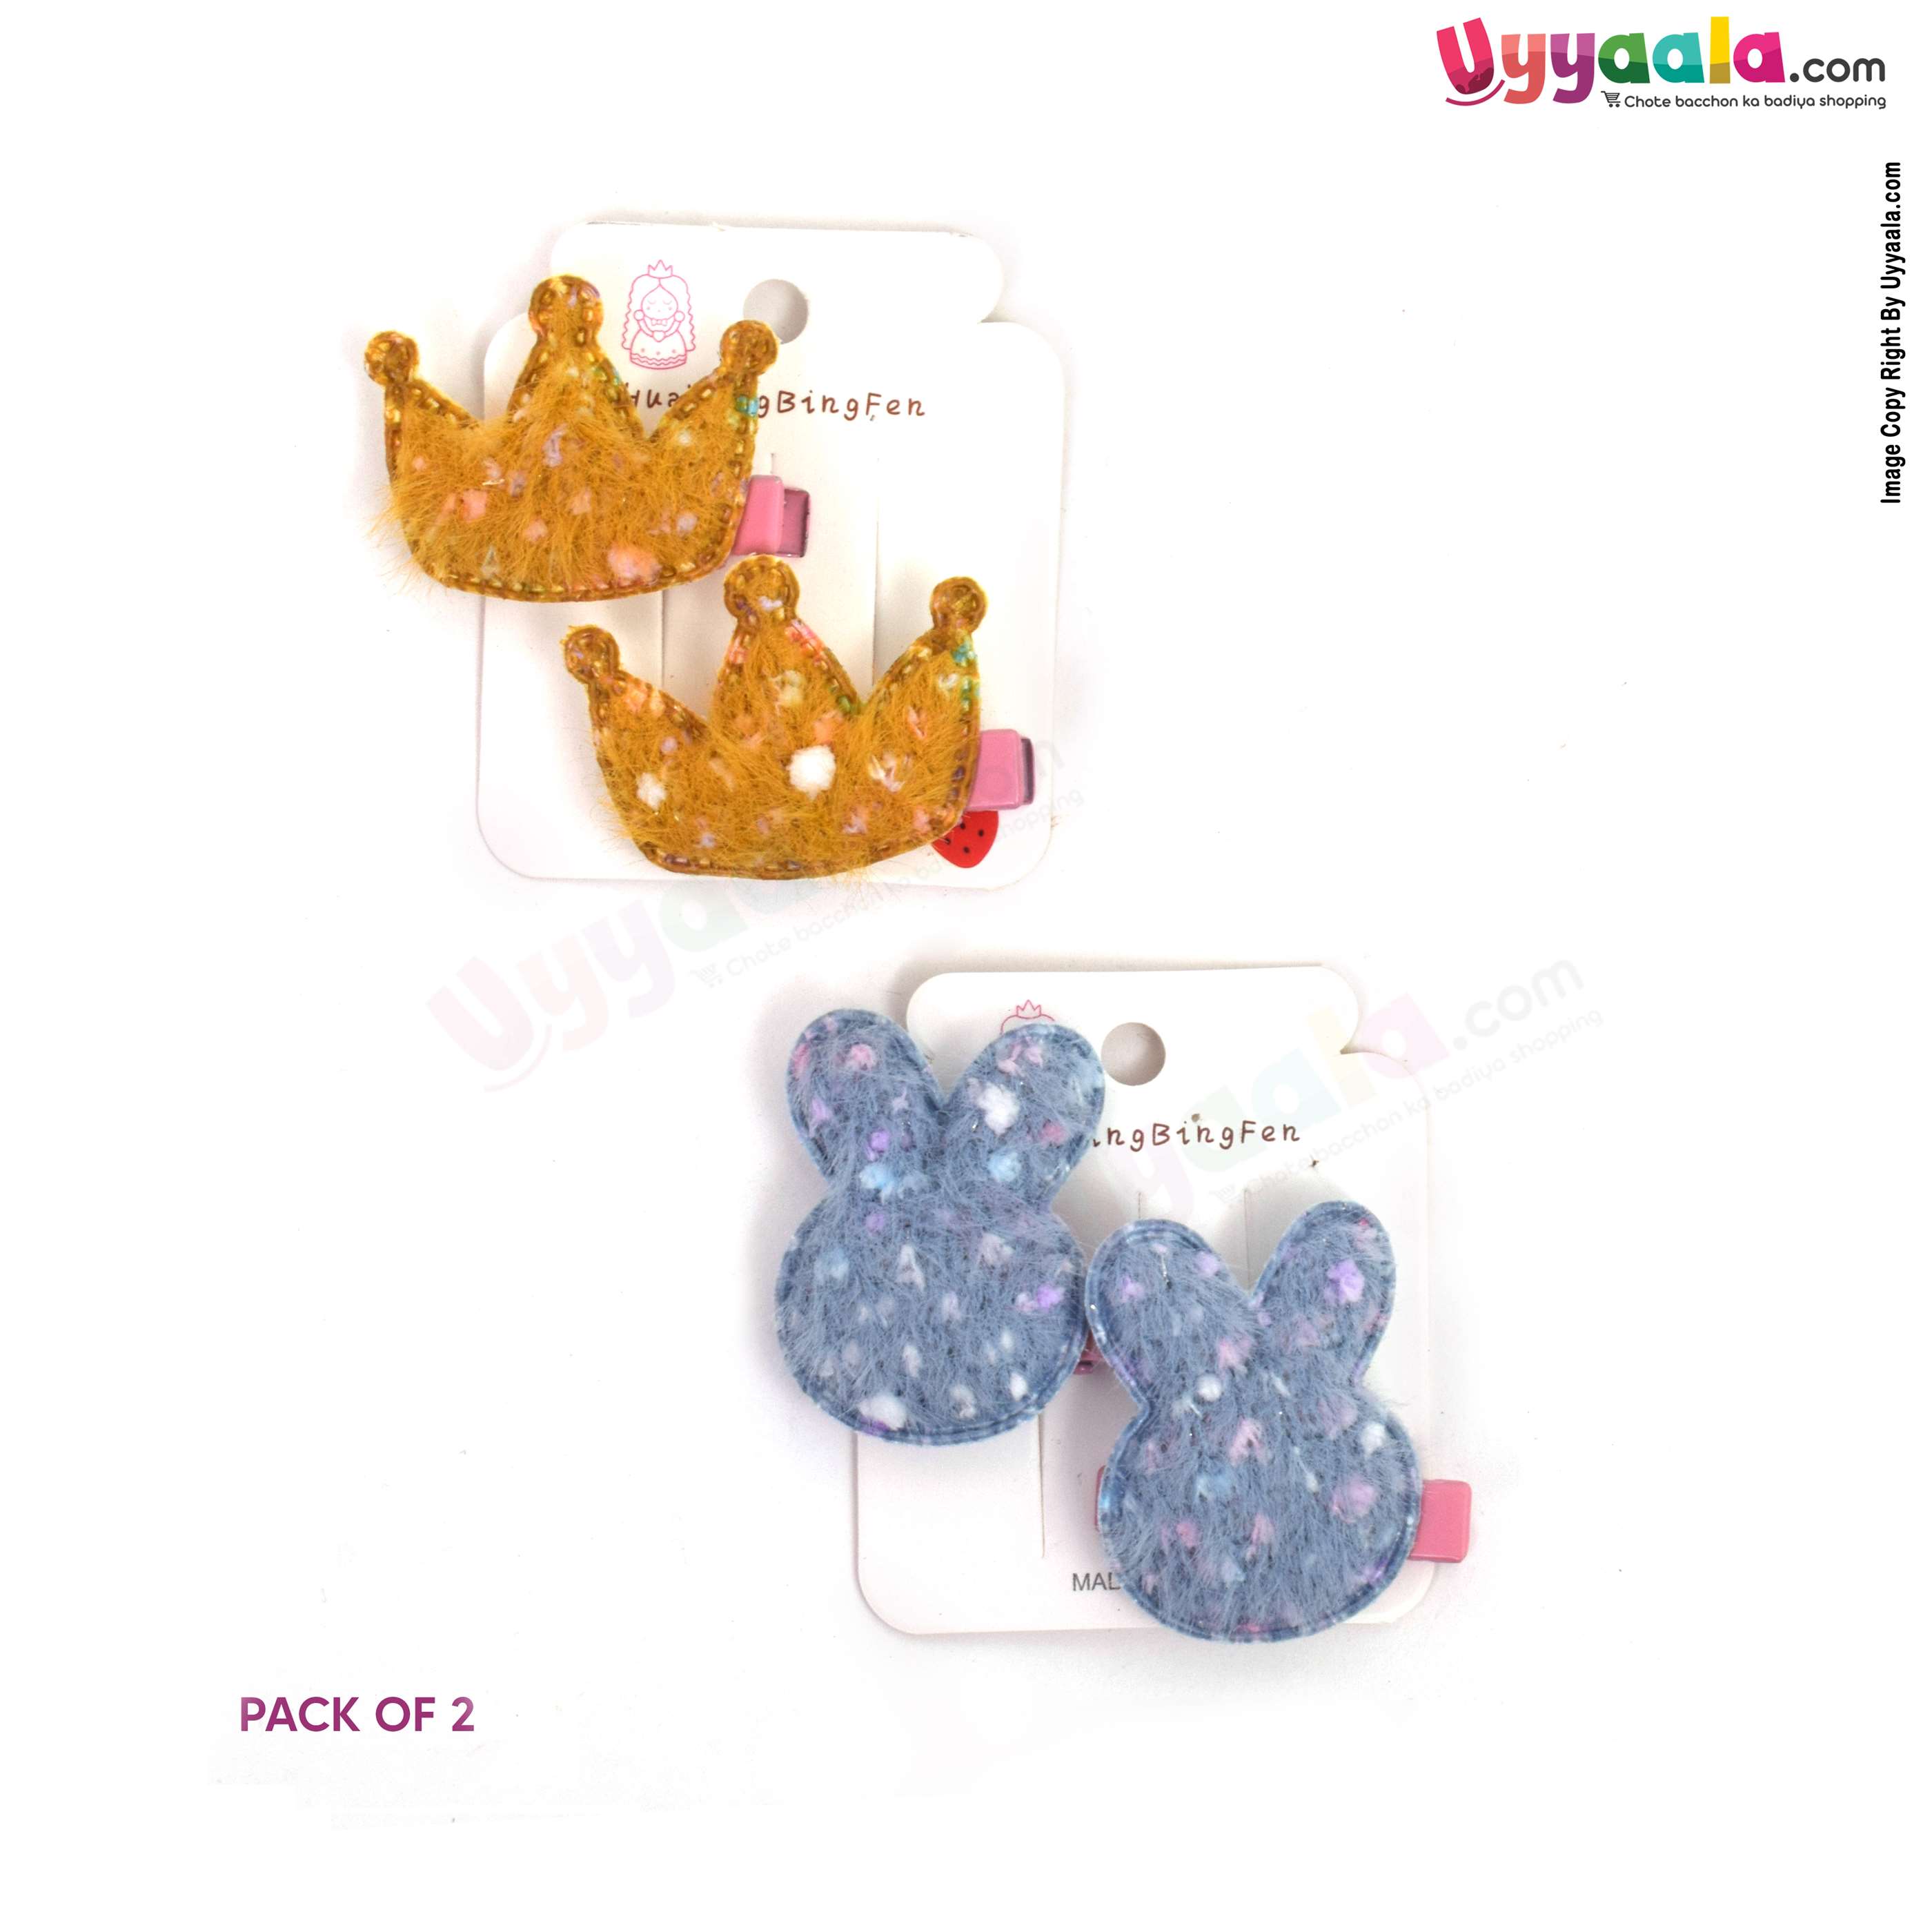 Crown & bunny hair clip set for babies & girls, Pack of 2 - yellow & blue, 6 + months